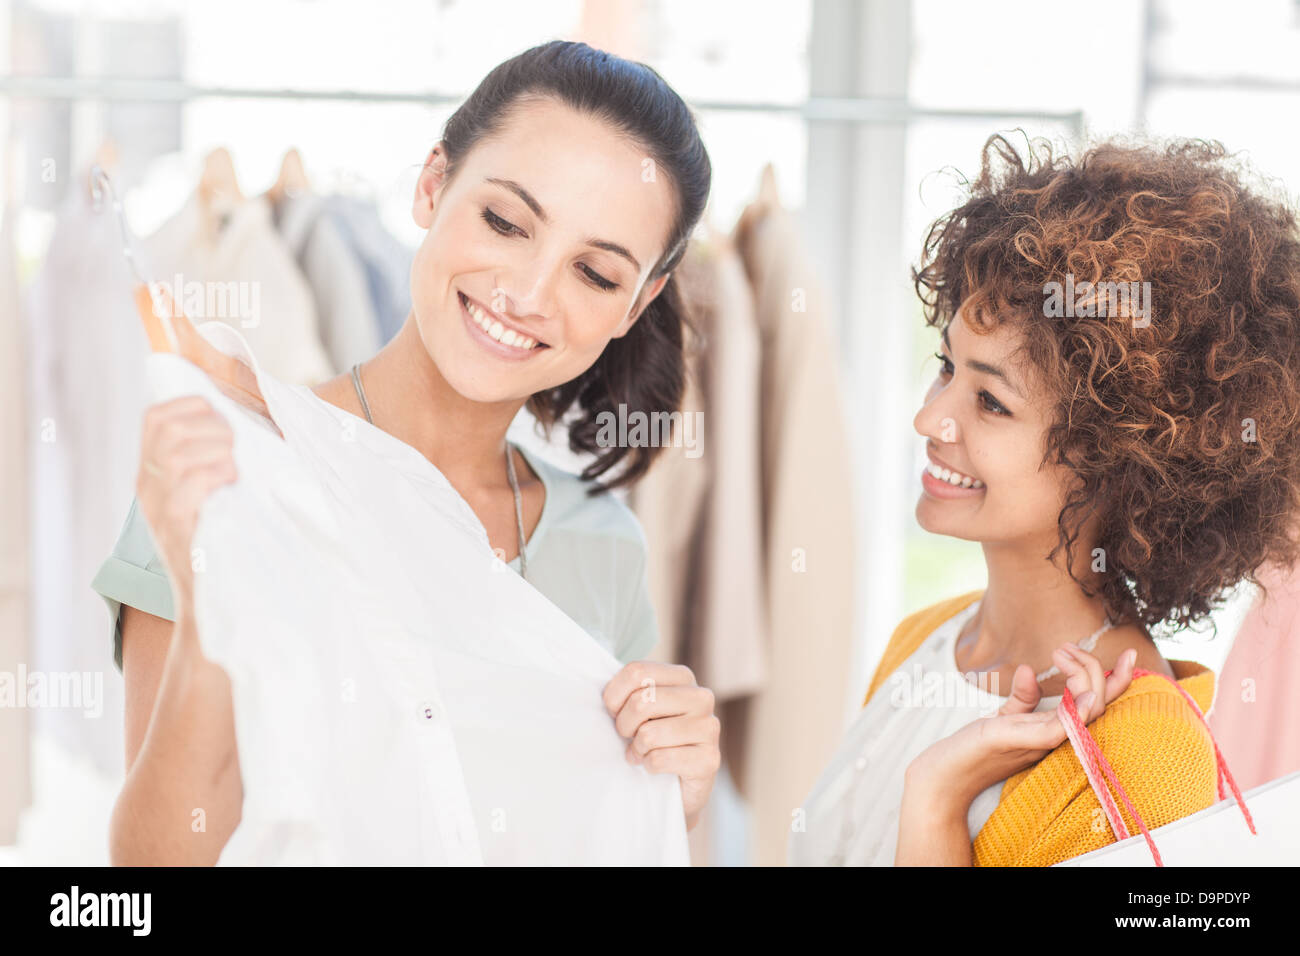 Attractive woman showing her new dress to her friend Stock Photo